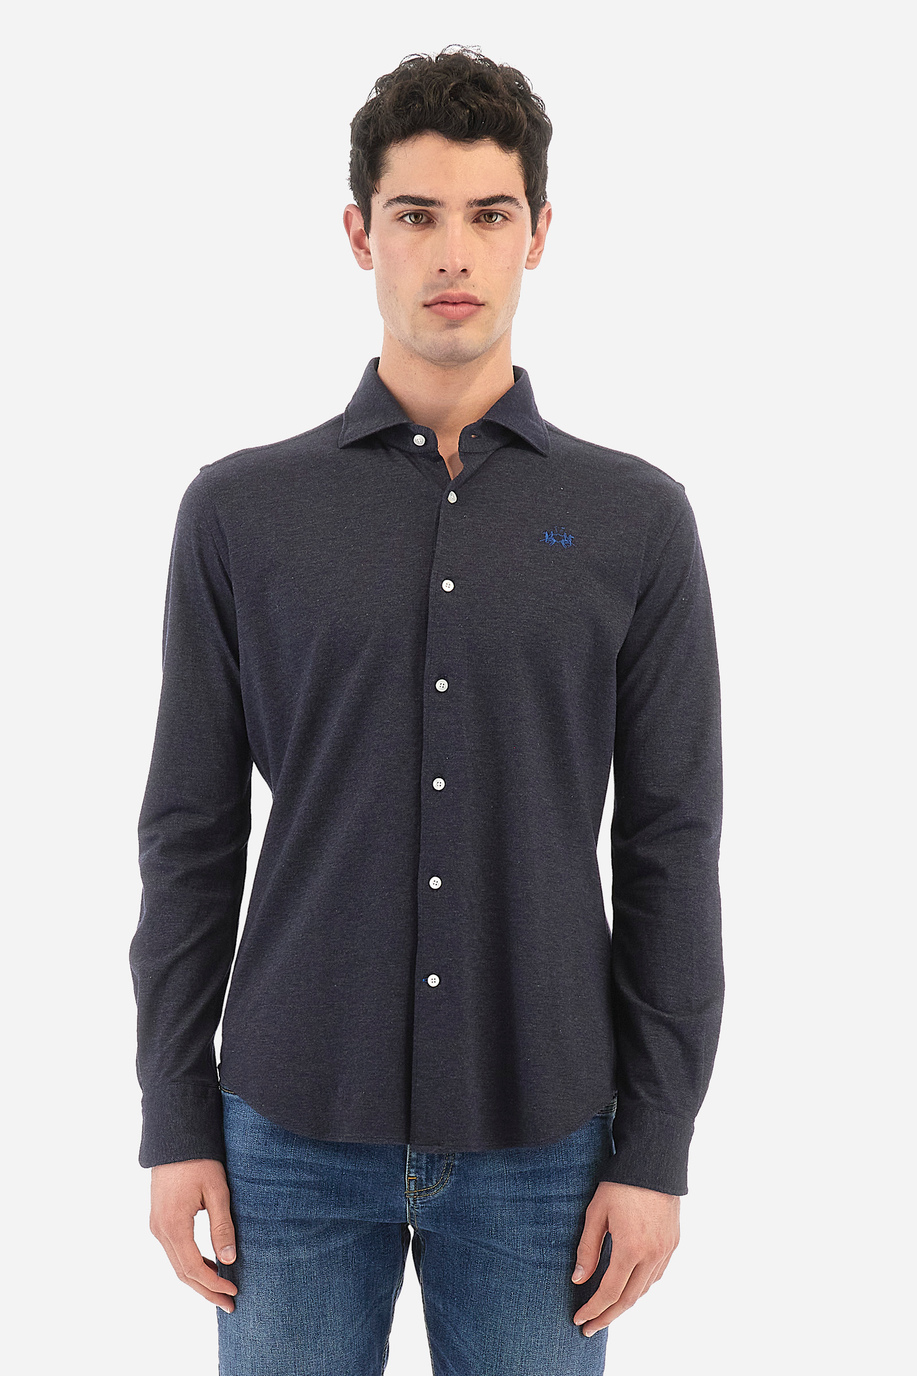 Long-sleeved shirt in cotton piqué, fitted cut for men - Qalam - Shirts | La Martina - Official Online Shop